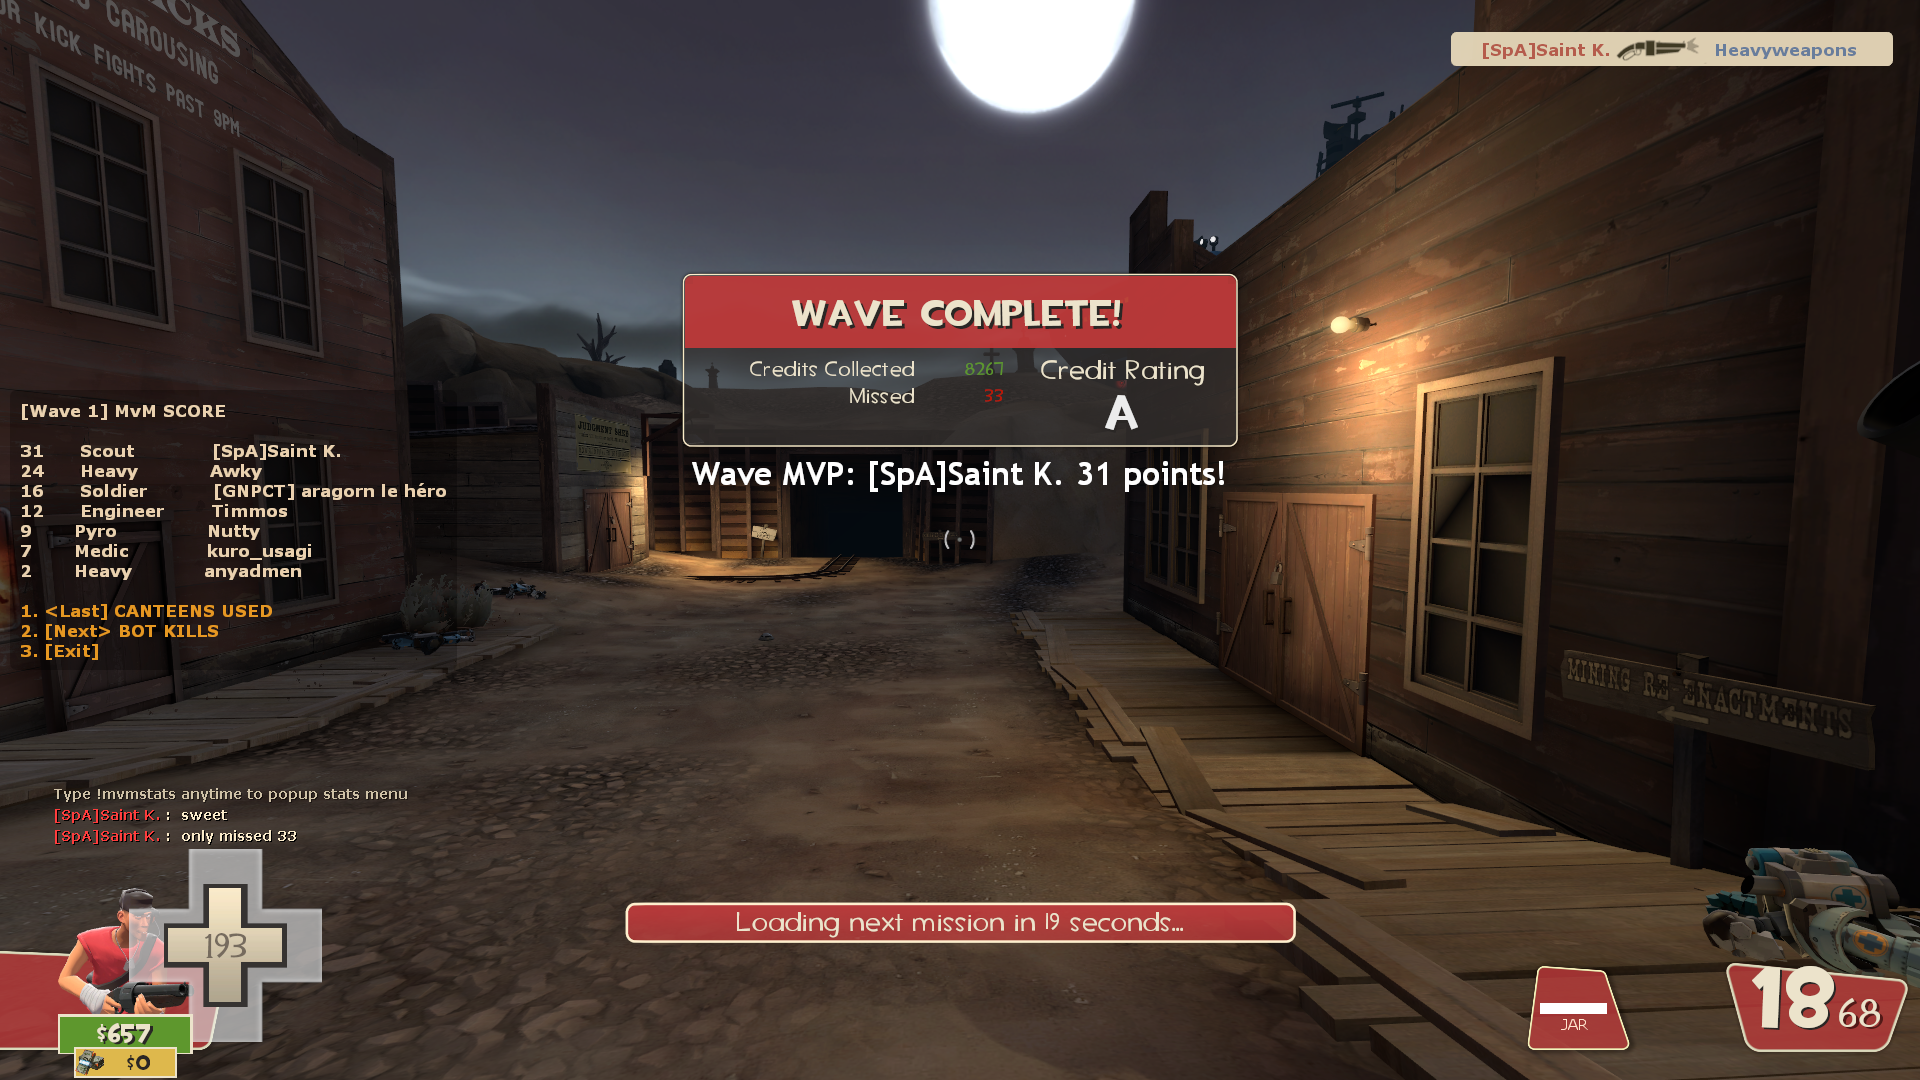 mvm_ghost_town0000_converted.png